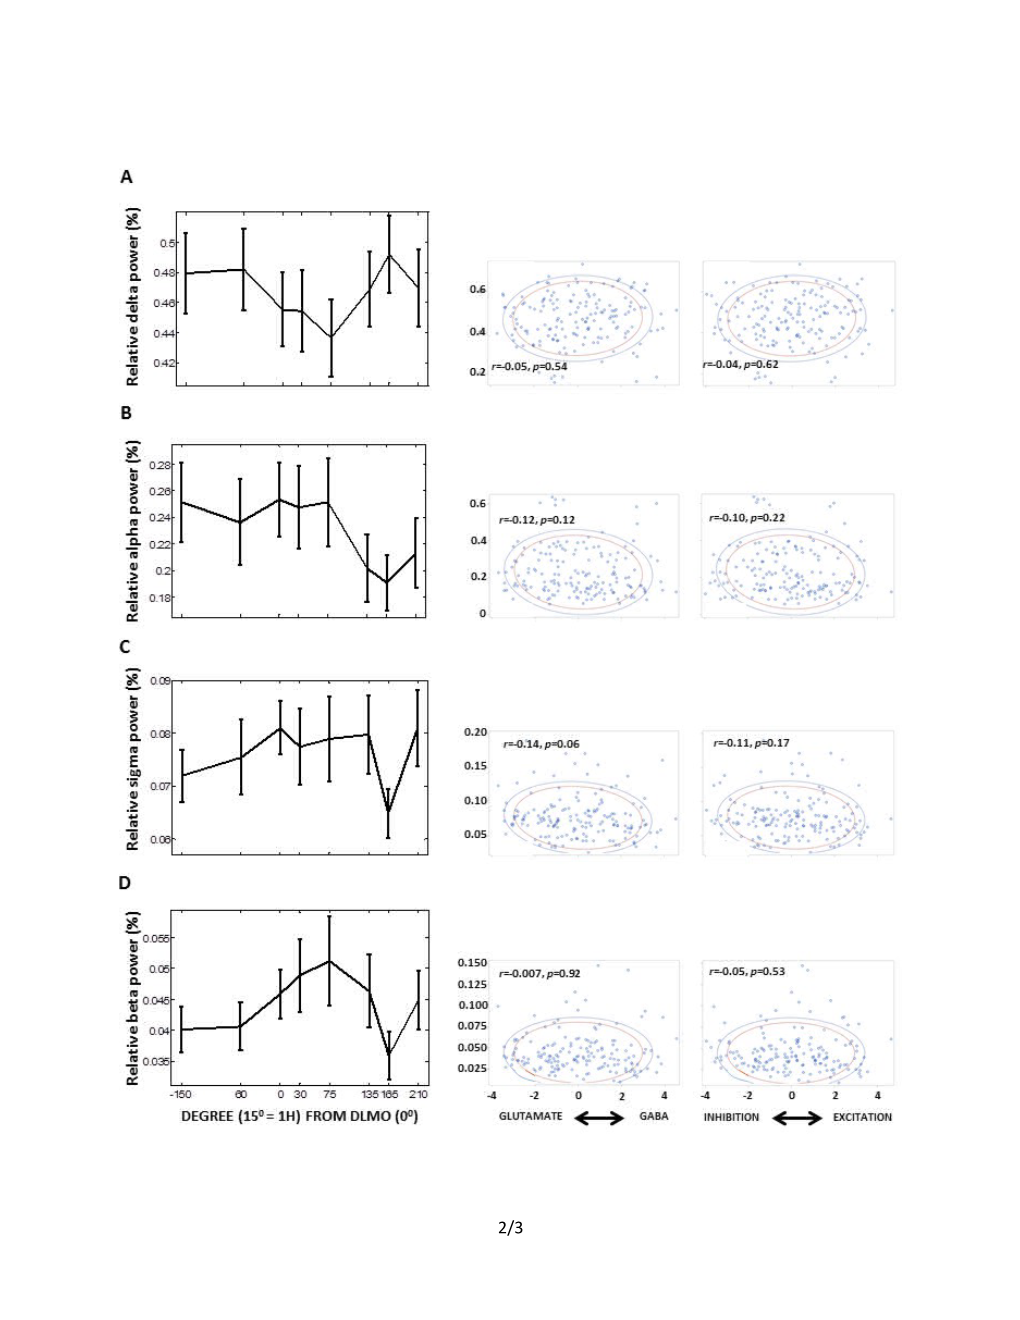 Circadian Dynamics in Measures of Cortical Excitation and Inhibition Balance